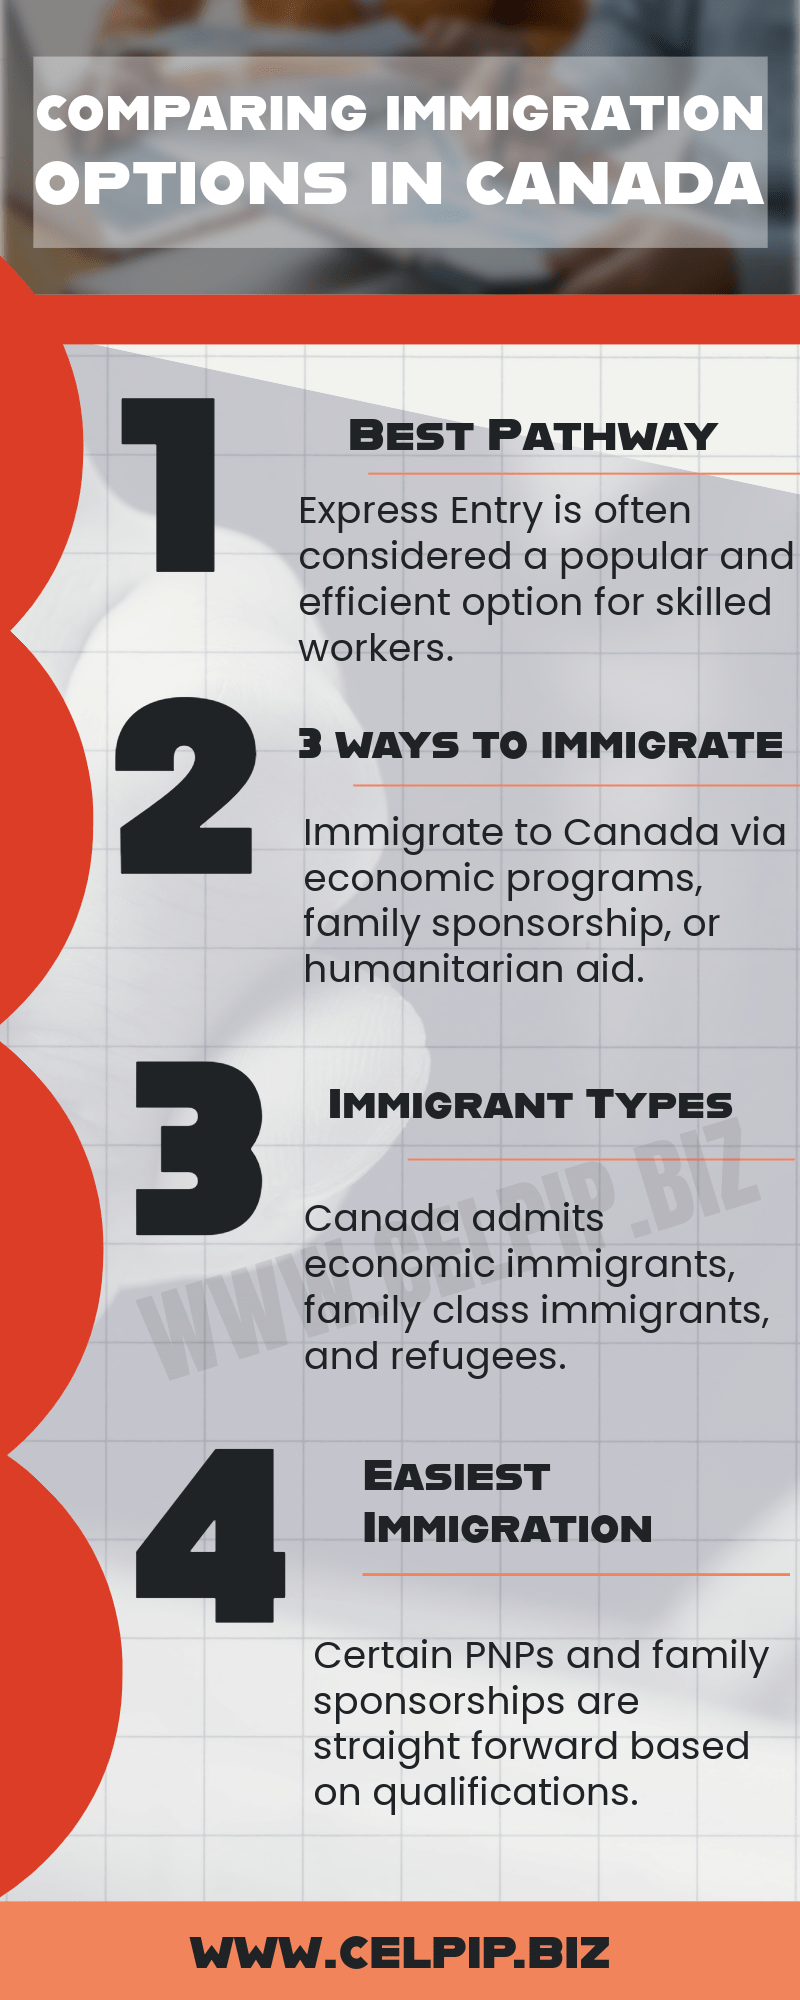 Immigration Options in Canada